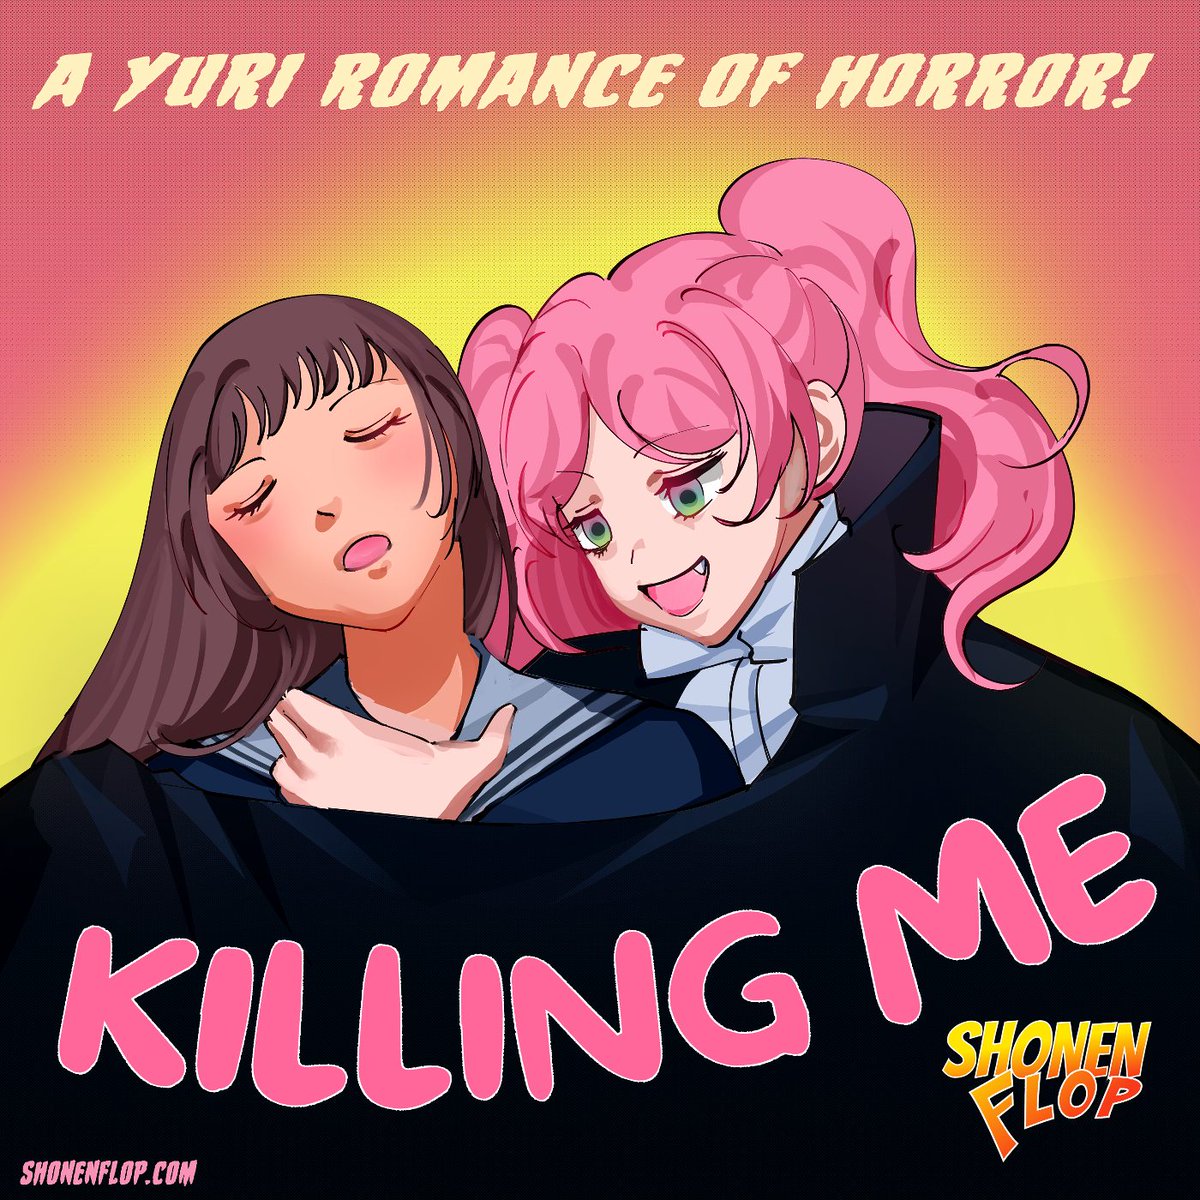 Can you believe it? 100 episodes! In this very special episode, we’re joined by @VoidBurger from @Skulltenders as we discuss Killing Me! Find it on Spotify bit.ly/3VYNOmG iTunes bit.ly/3vPPTa7 or YouTube bit.ly/3W2y7Lk #manga #podcast #anime